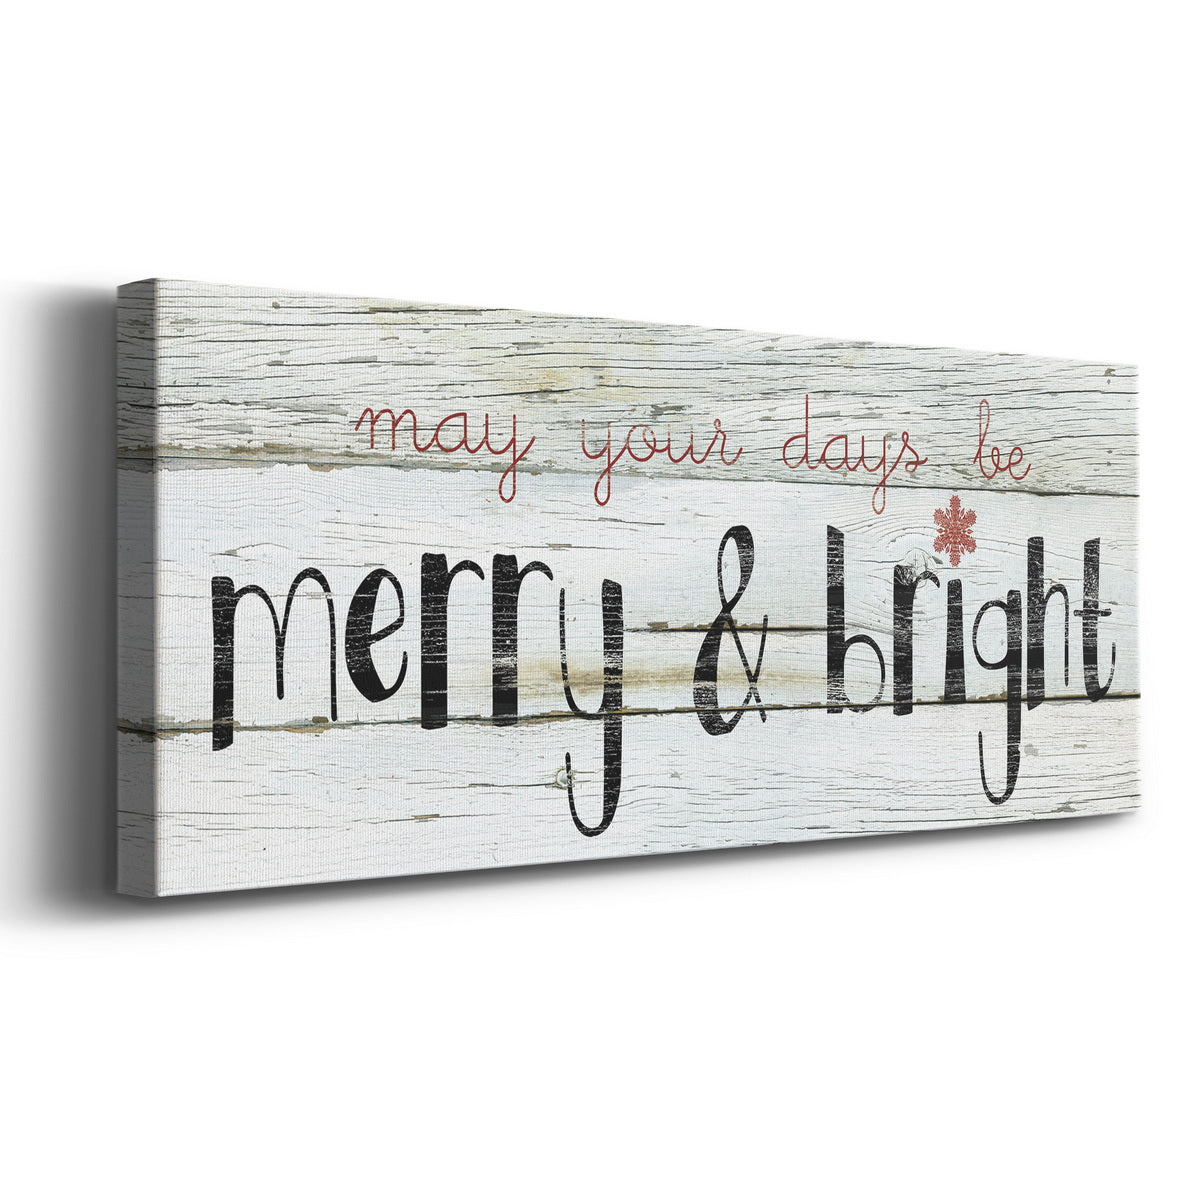 Merry & Bright Premium Gallery Wrapped Canvas - Ready to Hang